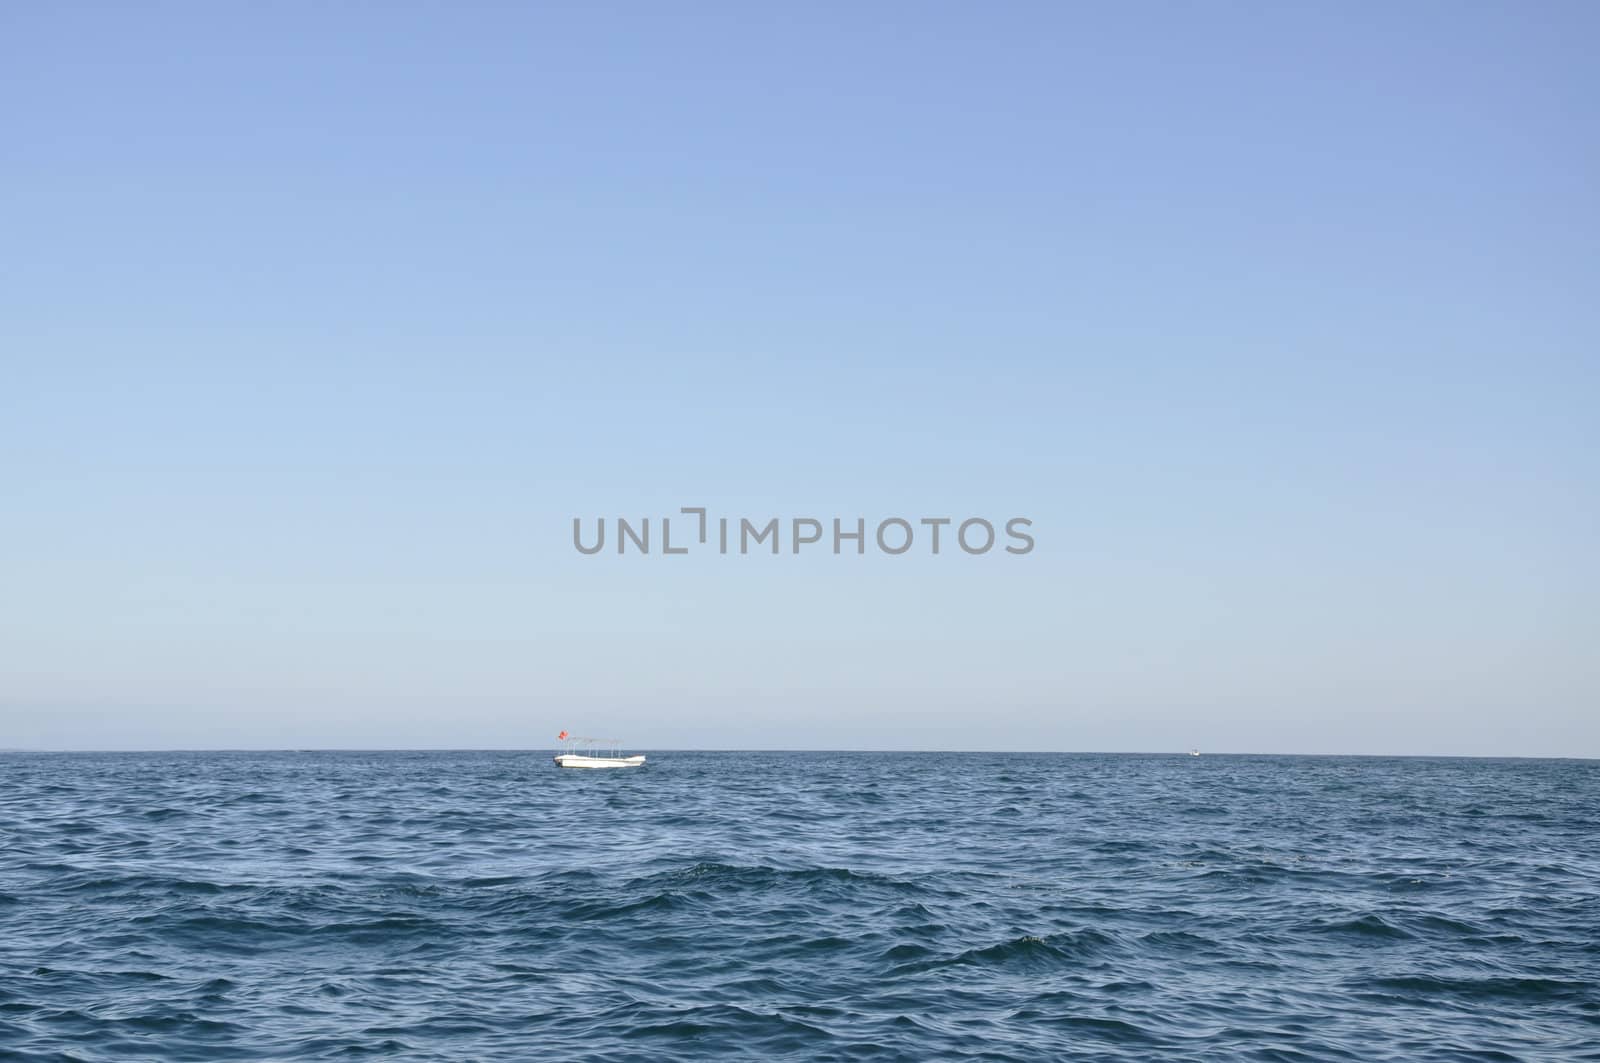 A boat sailing in the Indian Ocean by kdreams02